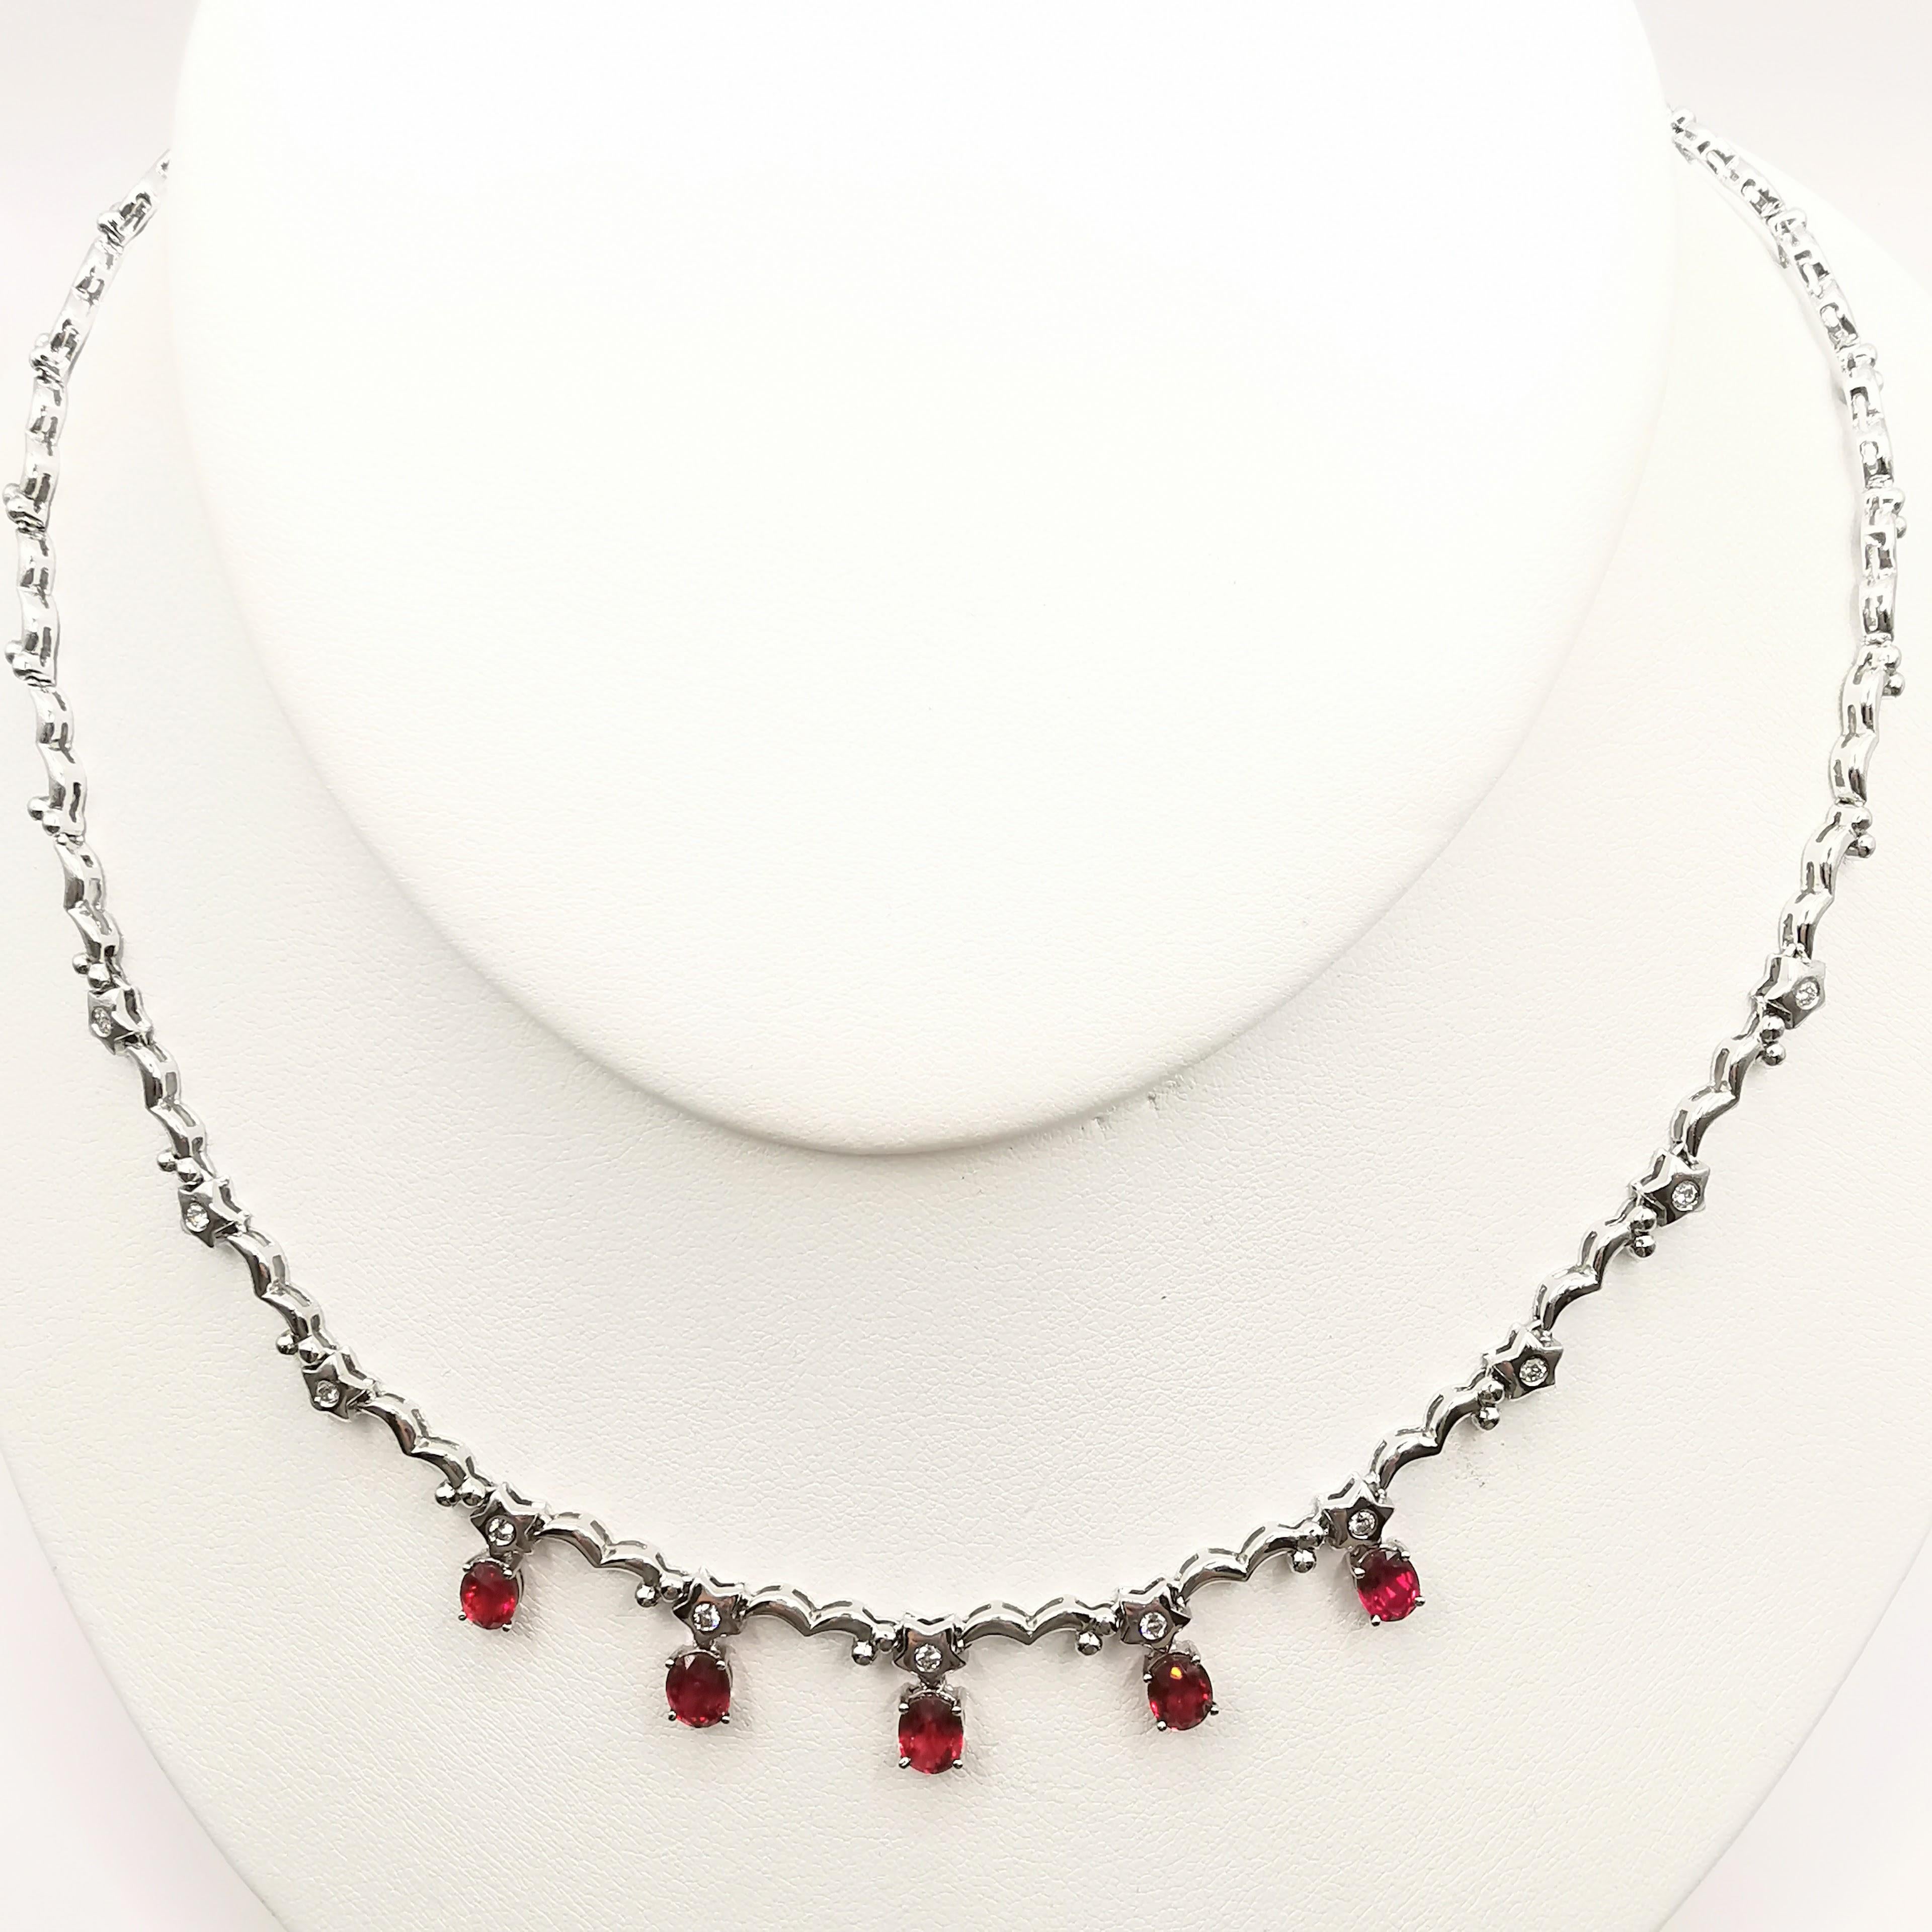 Introducing our exquisite 3.49 Carat Natural Oval Cut Pigeon Blood Ruby and Diamond Necklace, expertly crafted in 18K white gold. The necklace features five natural oval cut Pigeon Blood Rubies, with a total weight of 3.47 carats. The rubies boast